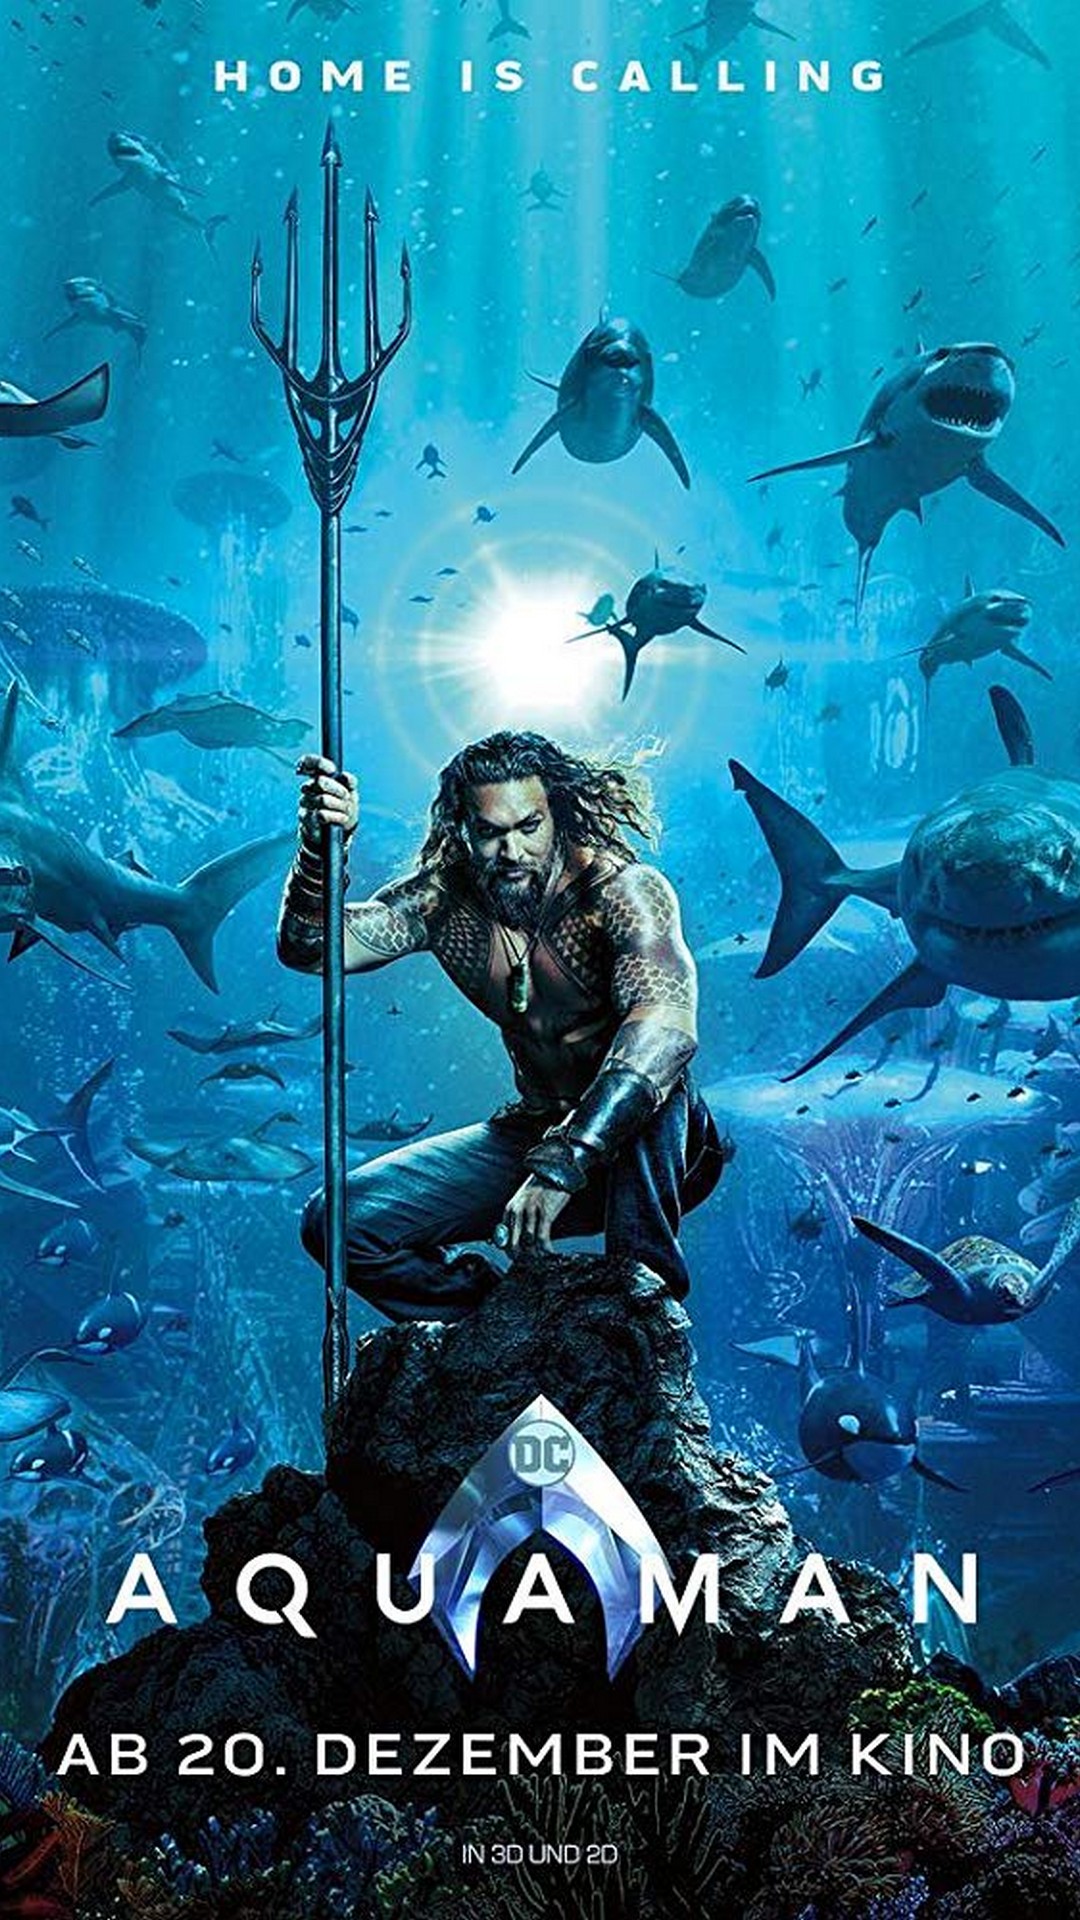 Aquaman iPhone Wallpapers with image resolution 1080x1920 pixel. You can use this wallpaper as background for your desktop Computer Screensavers, Android or iPhone smartphones